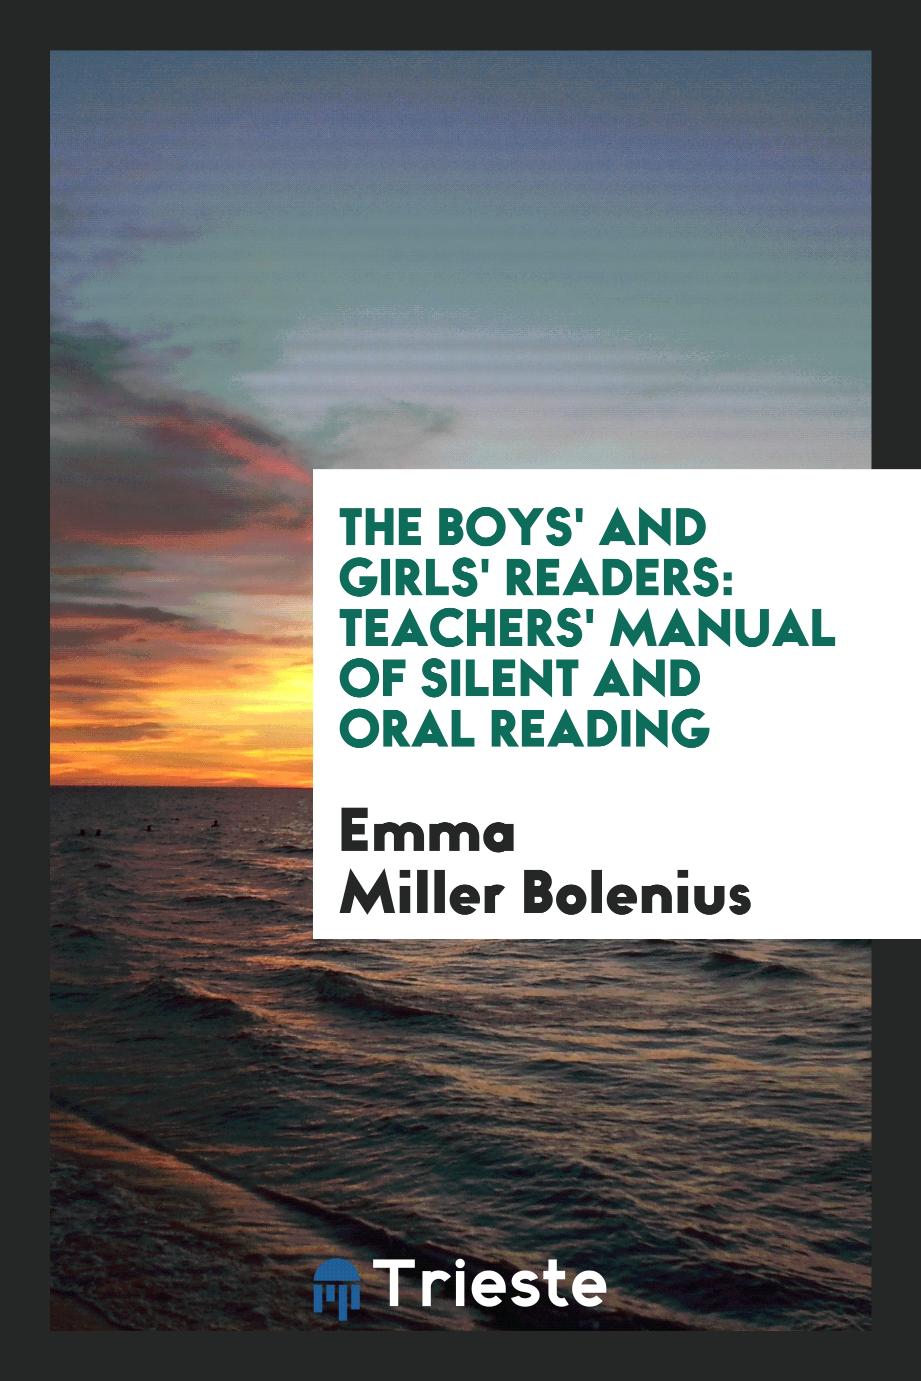 The Boys' and Girls' Readers: Teachers' Manual of Silent and Oral Reading